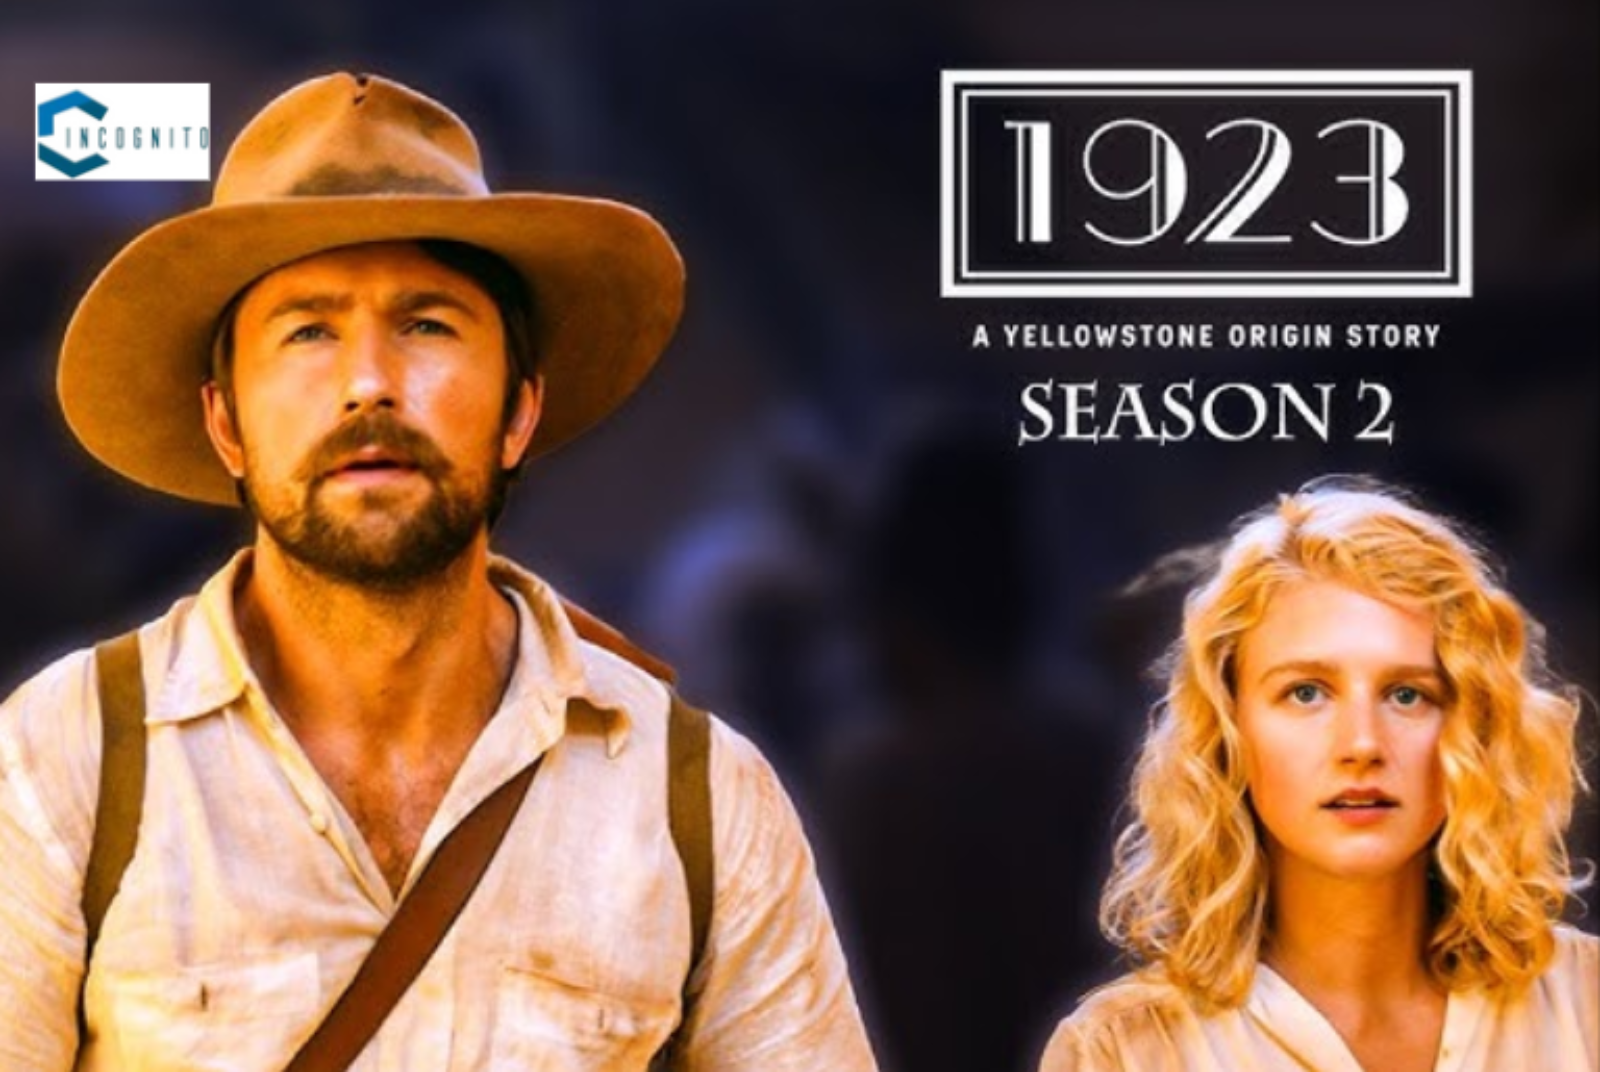 1923 Season 2: The Duttons Coming Again… Maybe in 2025?